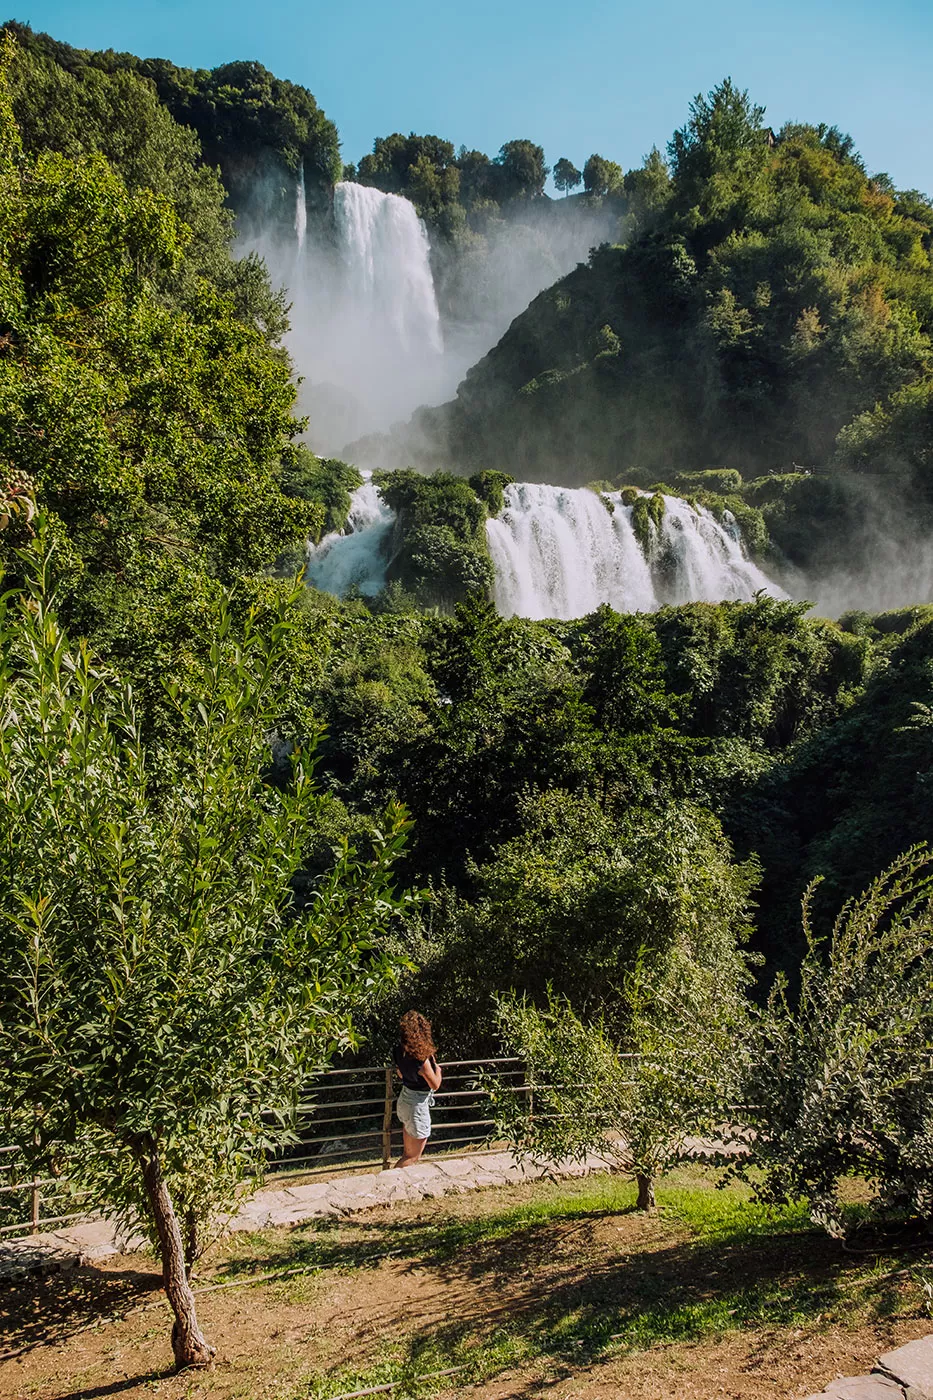 Things to do in Umbria Italy - Cascata delle Marmore - Marmore Falls from below